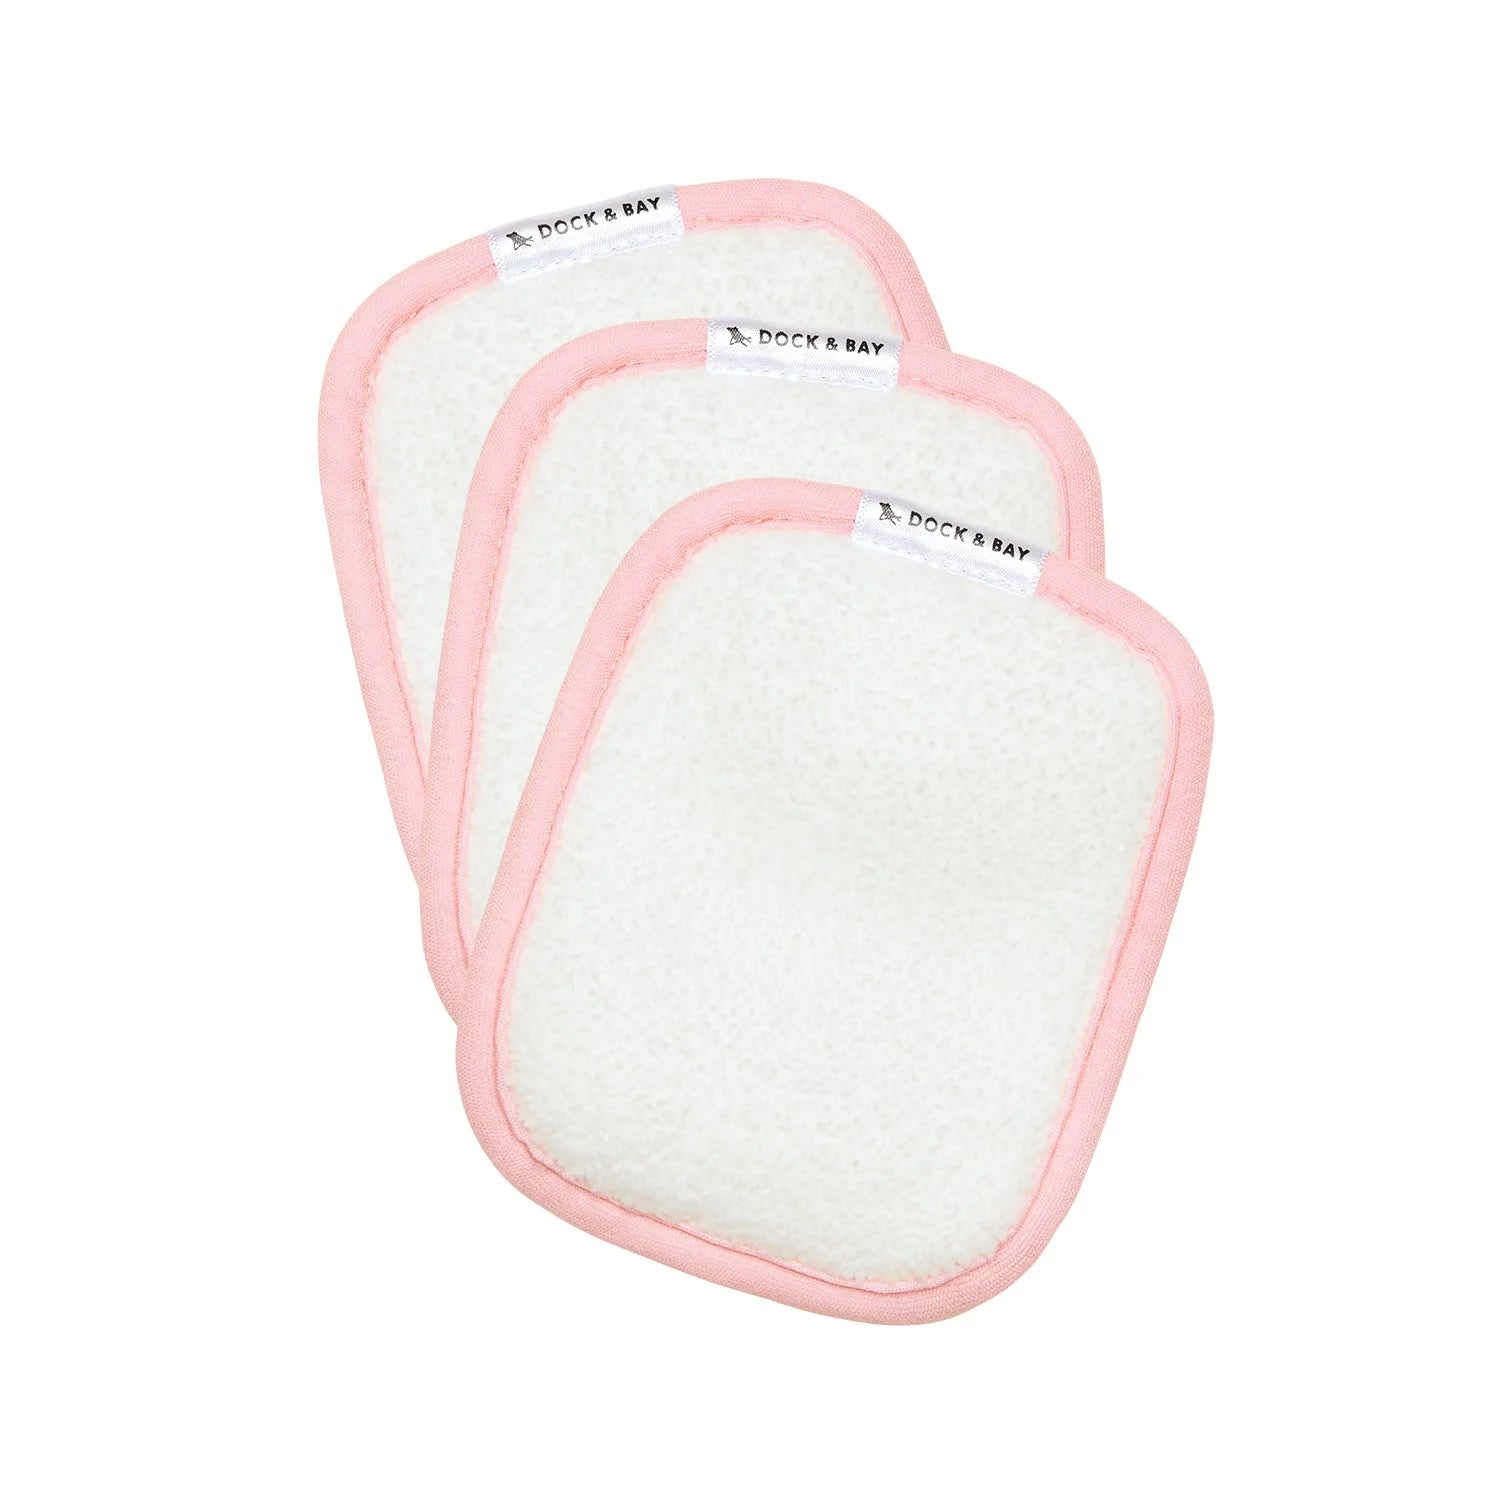 Reusable Makeup Removers - Assorted Colors